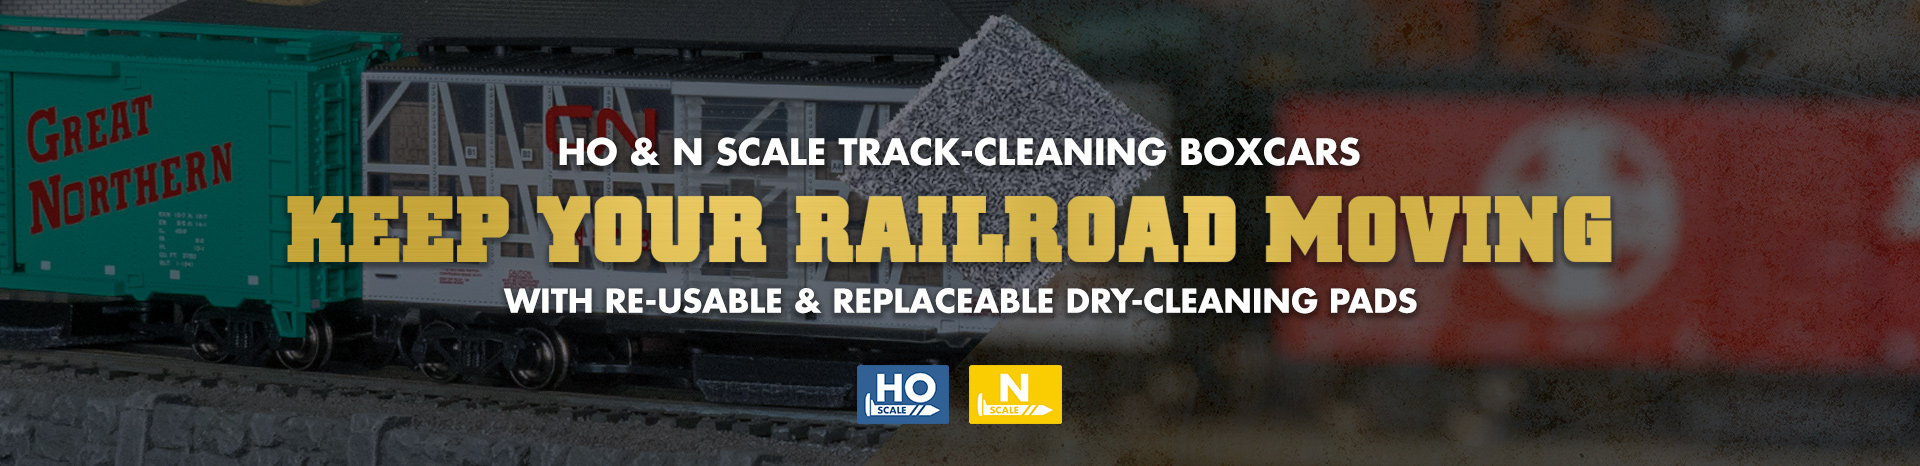 Track-Cleaning Boxcars